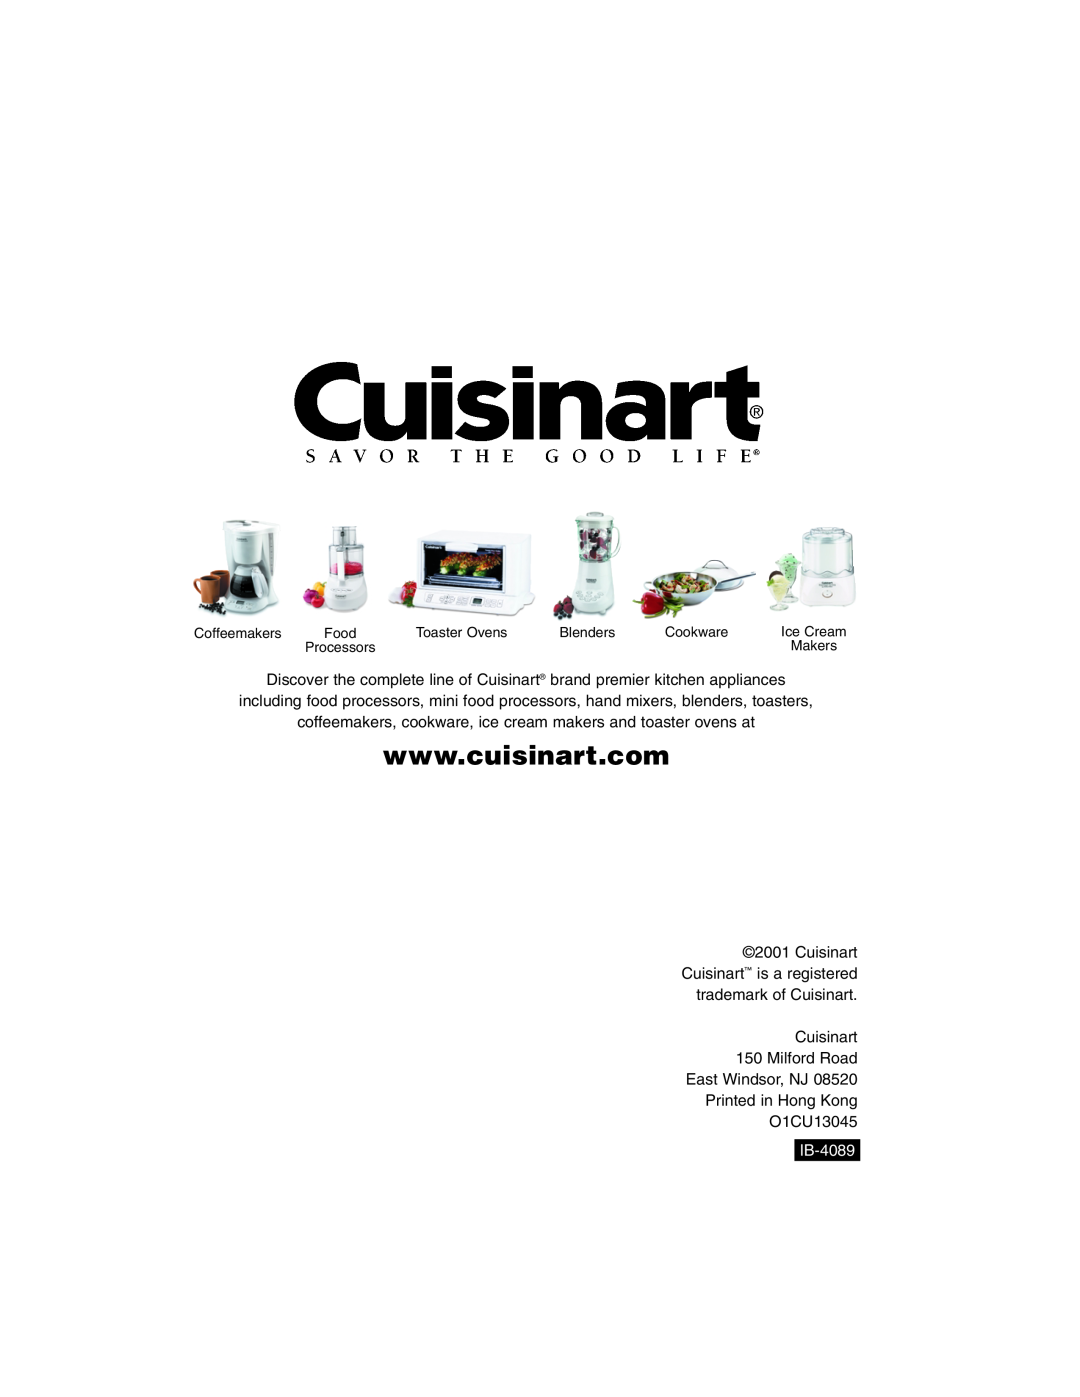 Cuisinart DCC-100C manual coffeemakers, cookware, ice cream makers and toaster ovens at, IB-4089 